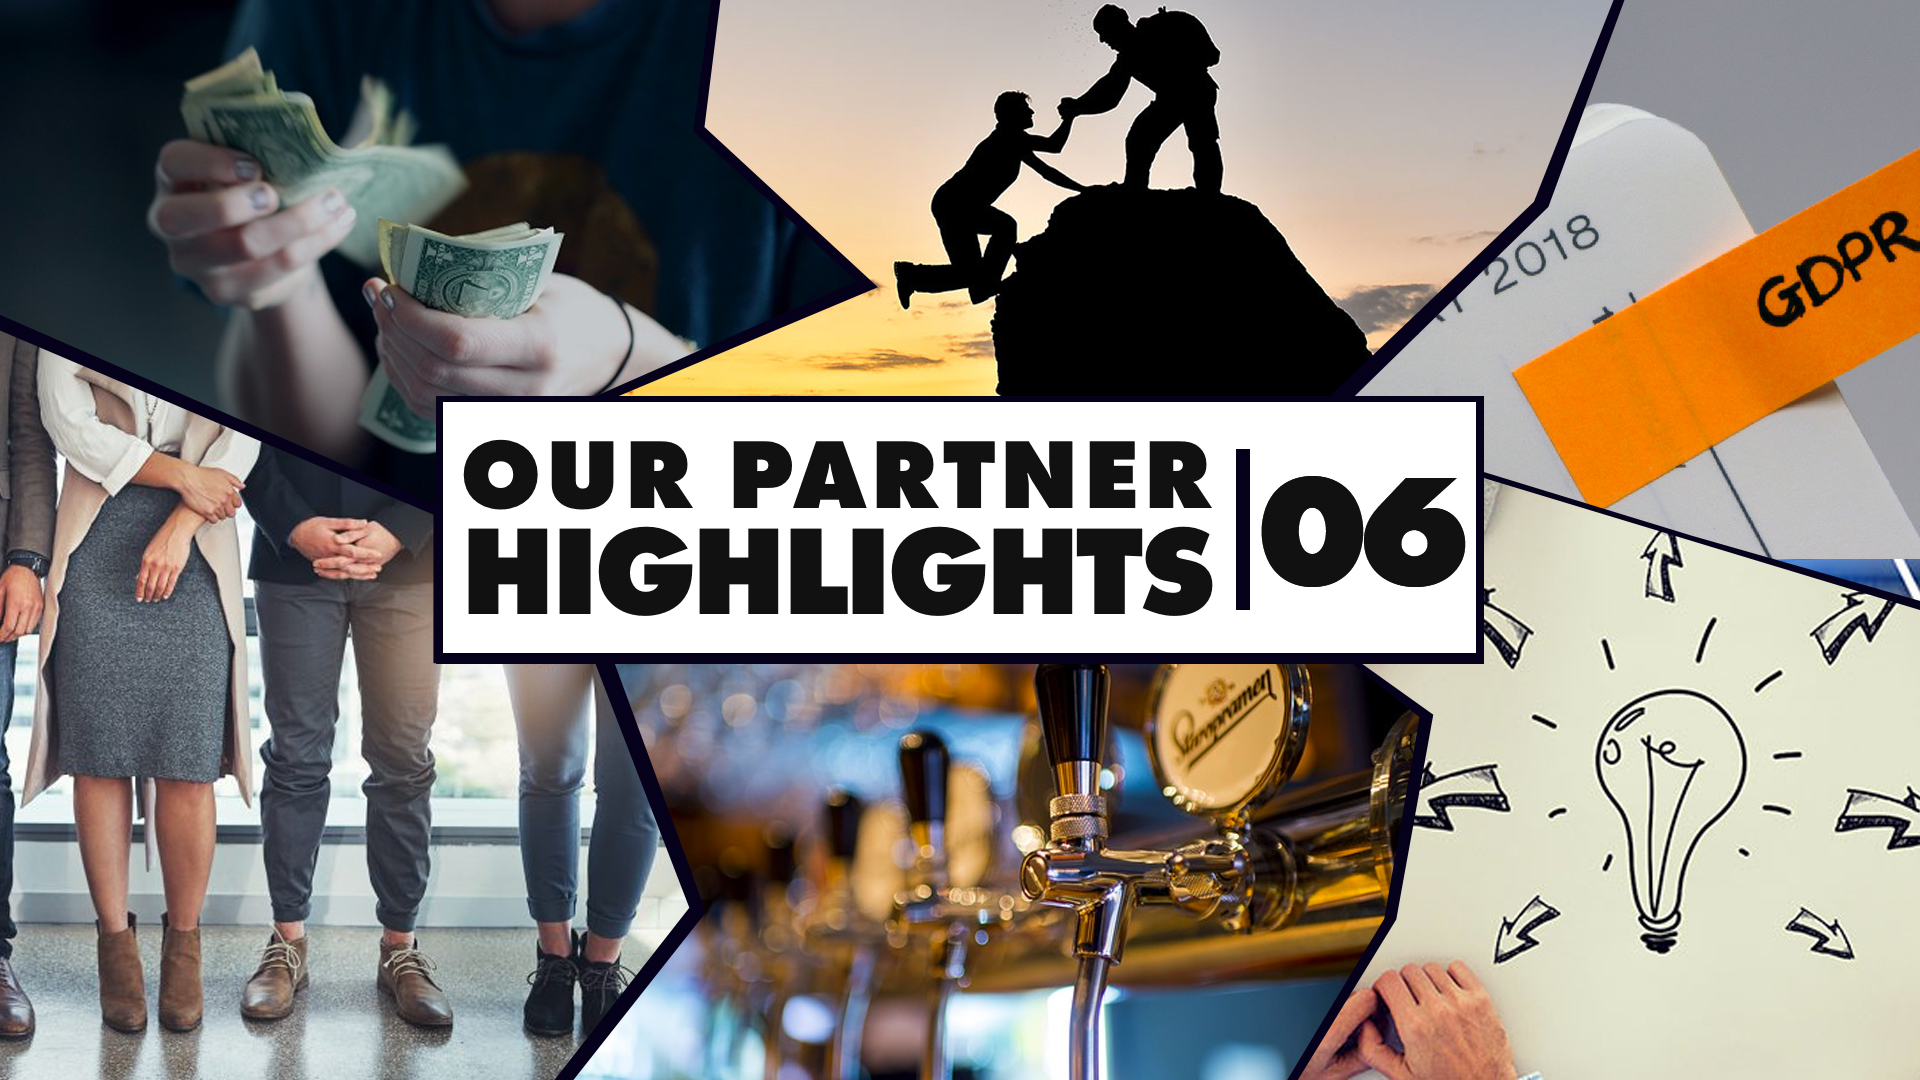 Our Partner Highlights | 06